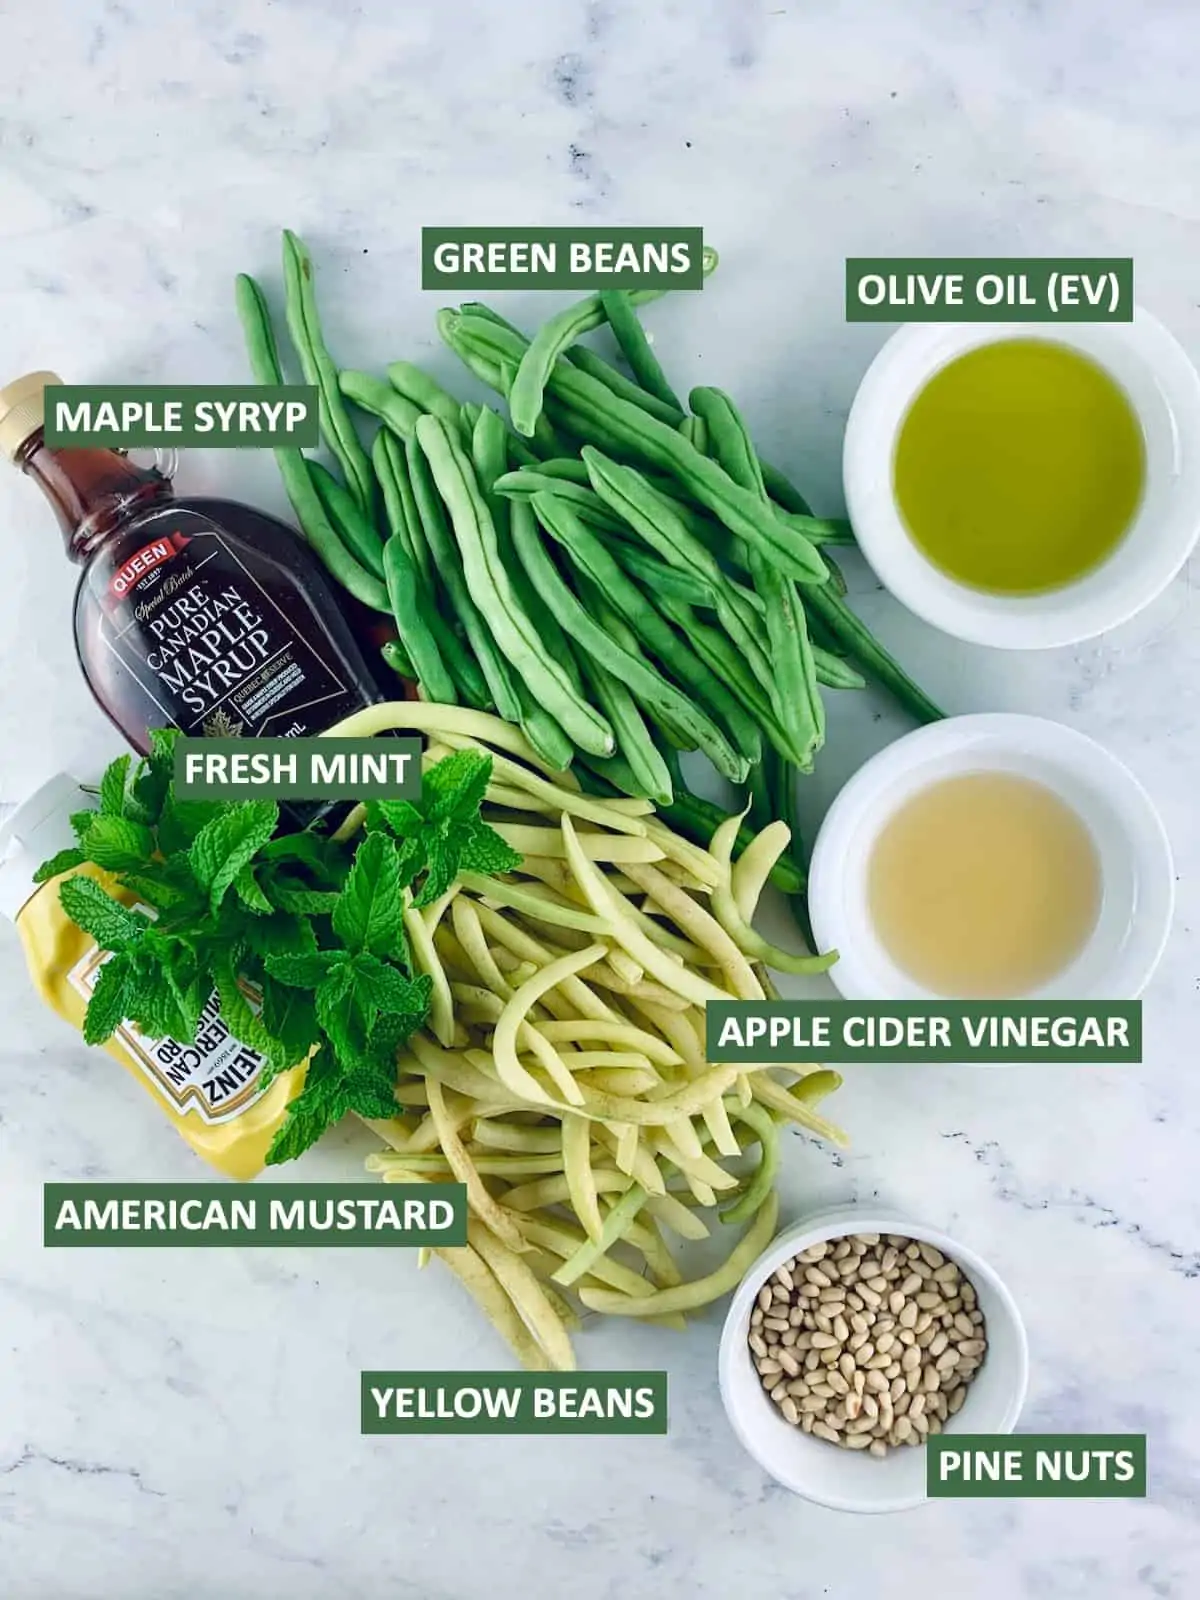 Labelled ingredients needed to make a Yellow Bean Salad.